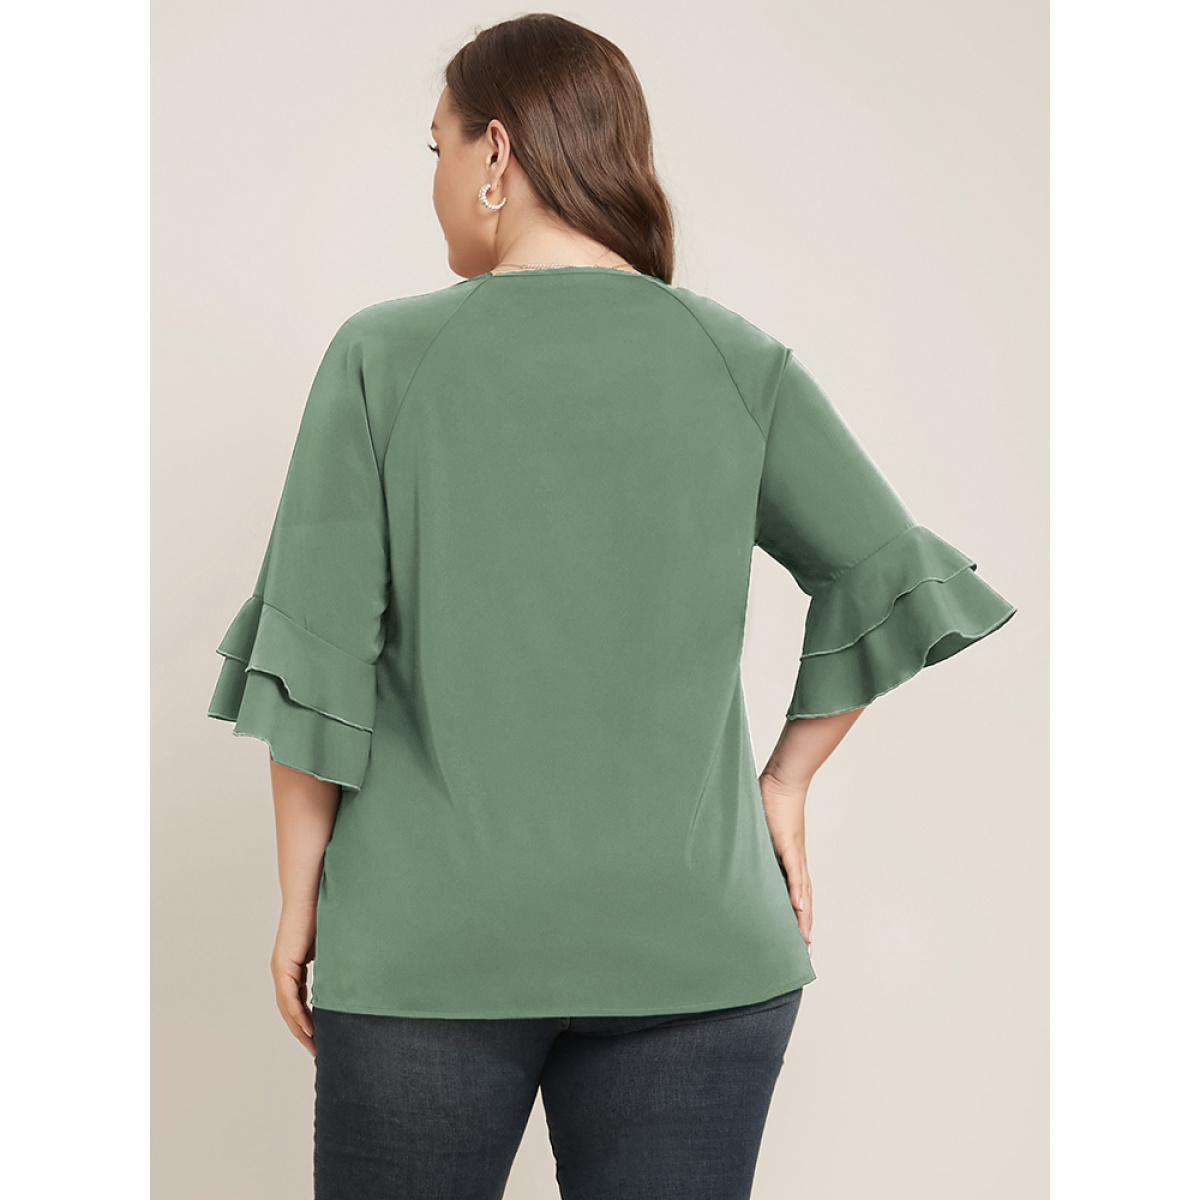 

Plus Size Mint Plain Ruffle Tiered Round Neck Blouse Women Work From Home Elbow-length sleeve Round Neck Work Blouses BloomChic